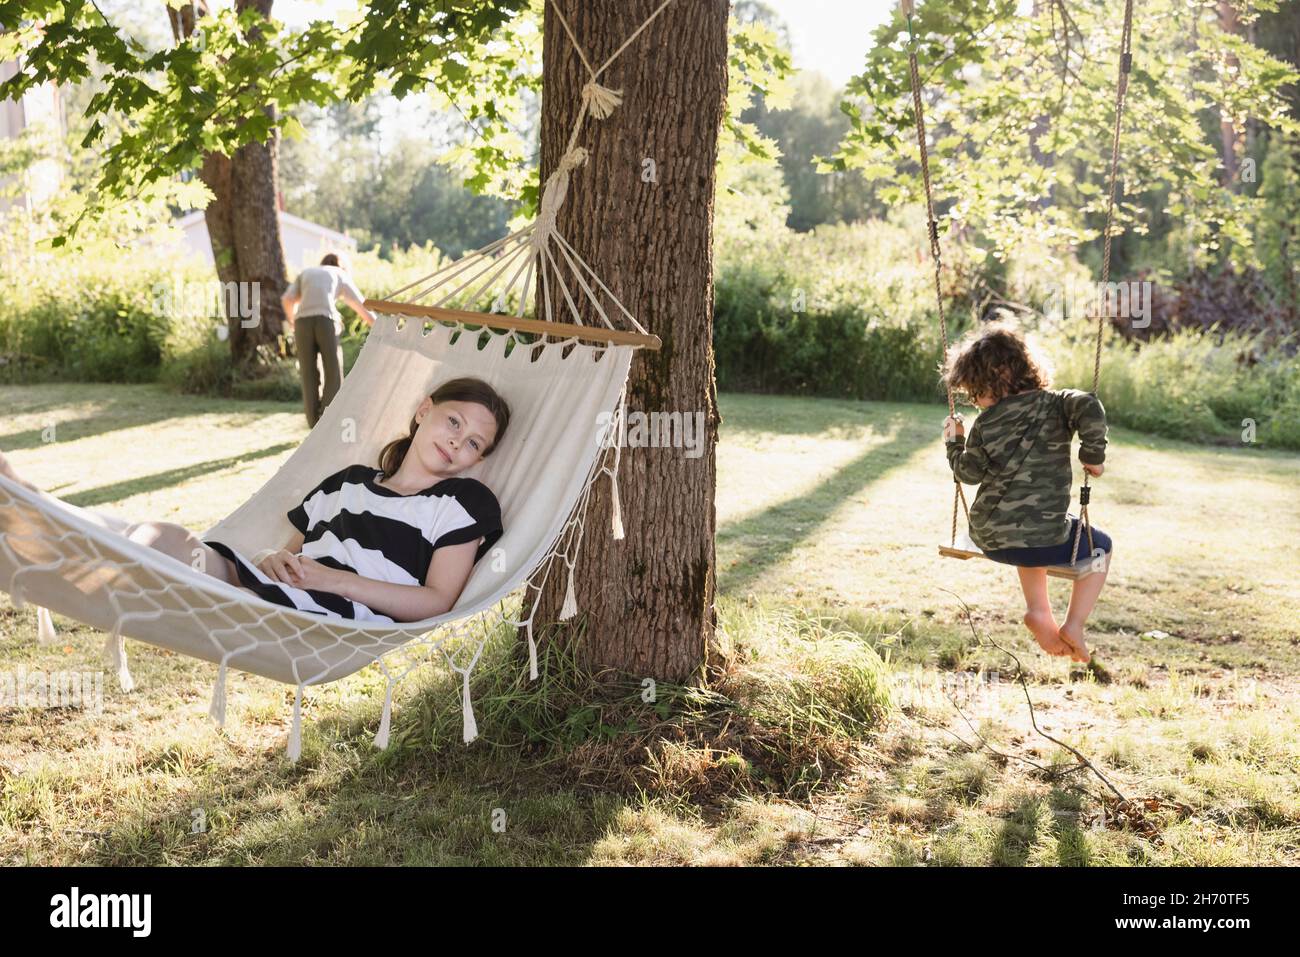 Girl and boy on hammock and swing Stock Photo